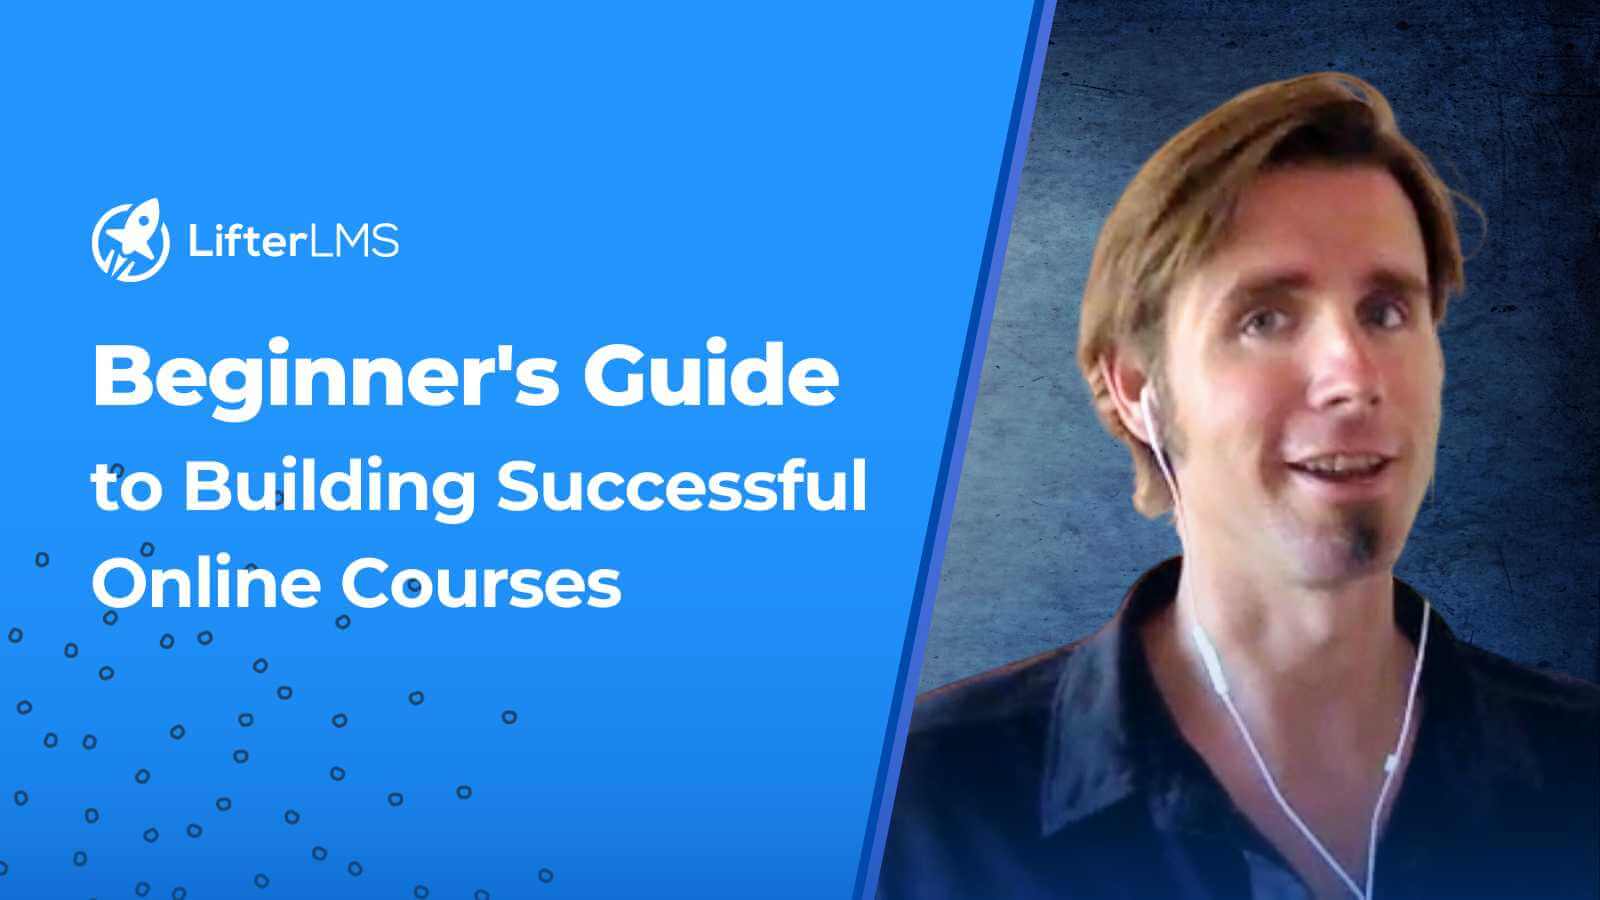 Beginner's Guide to Building Successful Online Courses